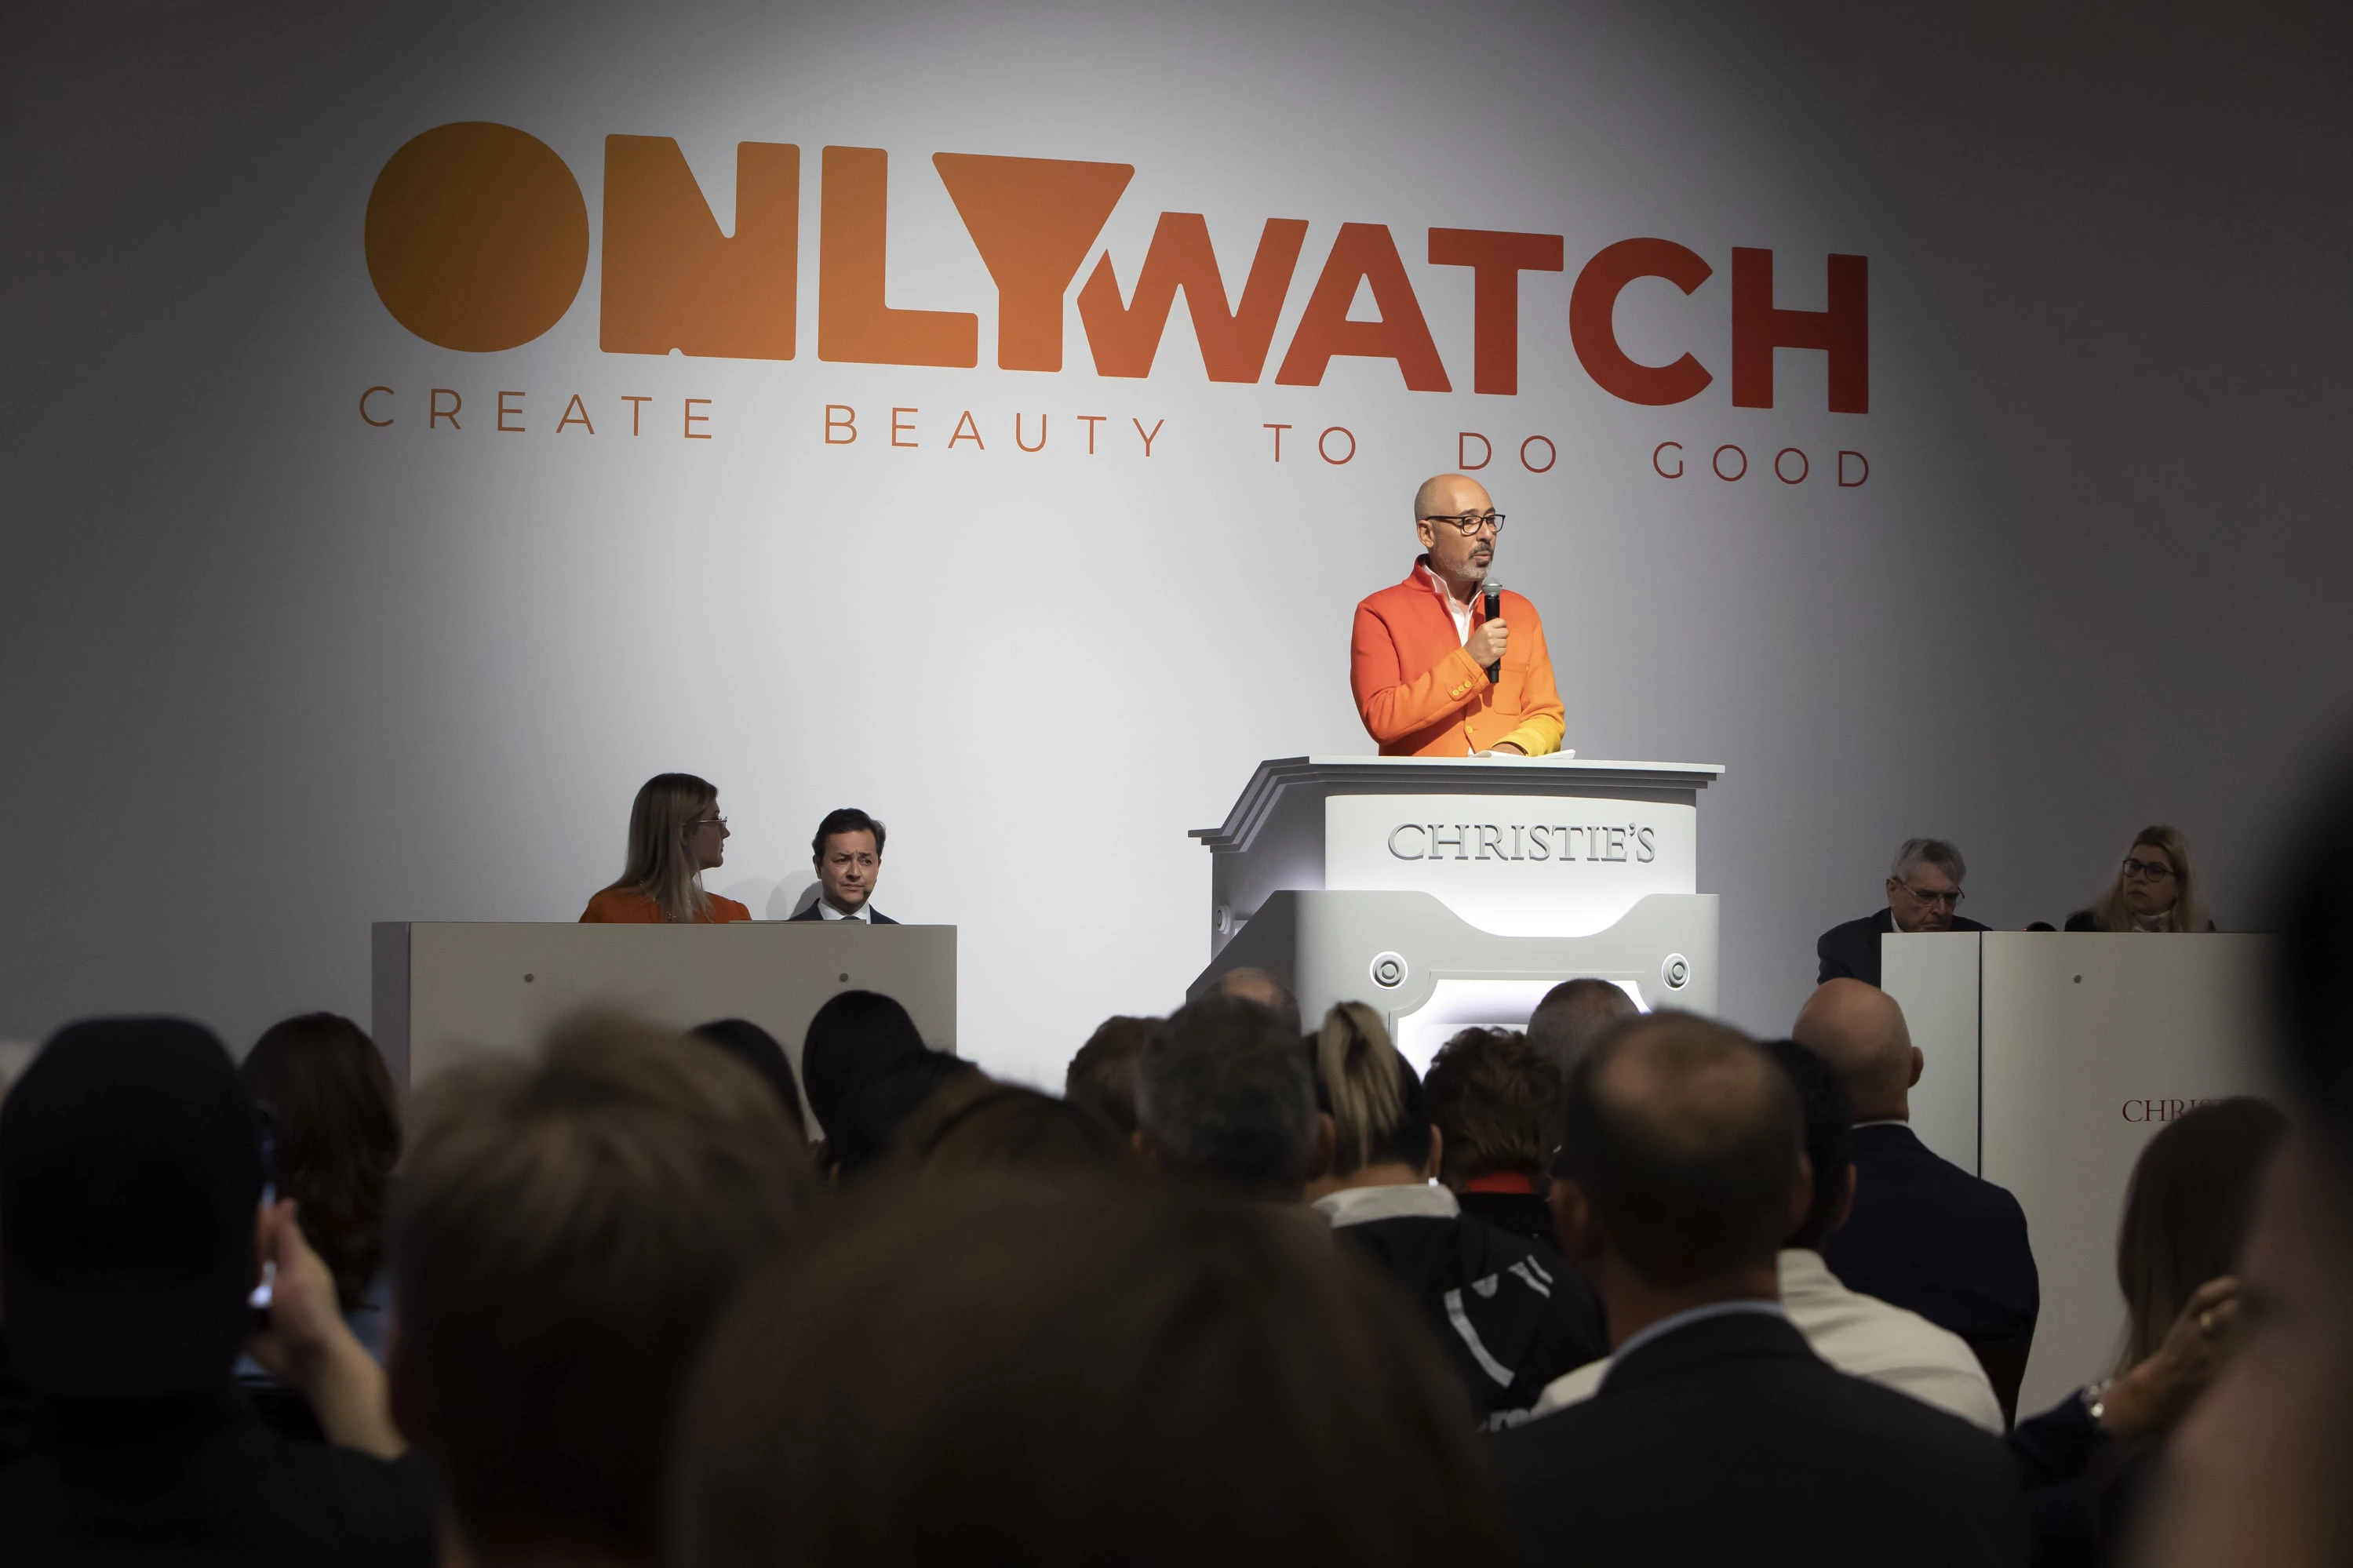 Only Watch charity auction